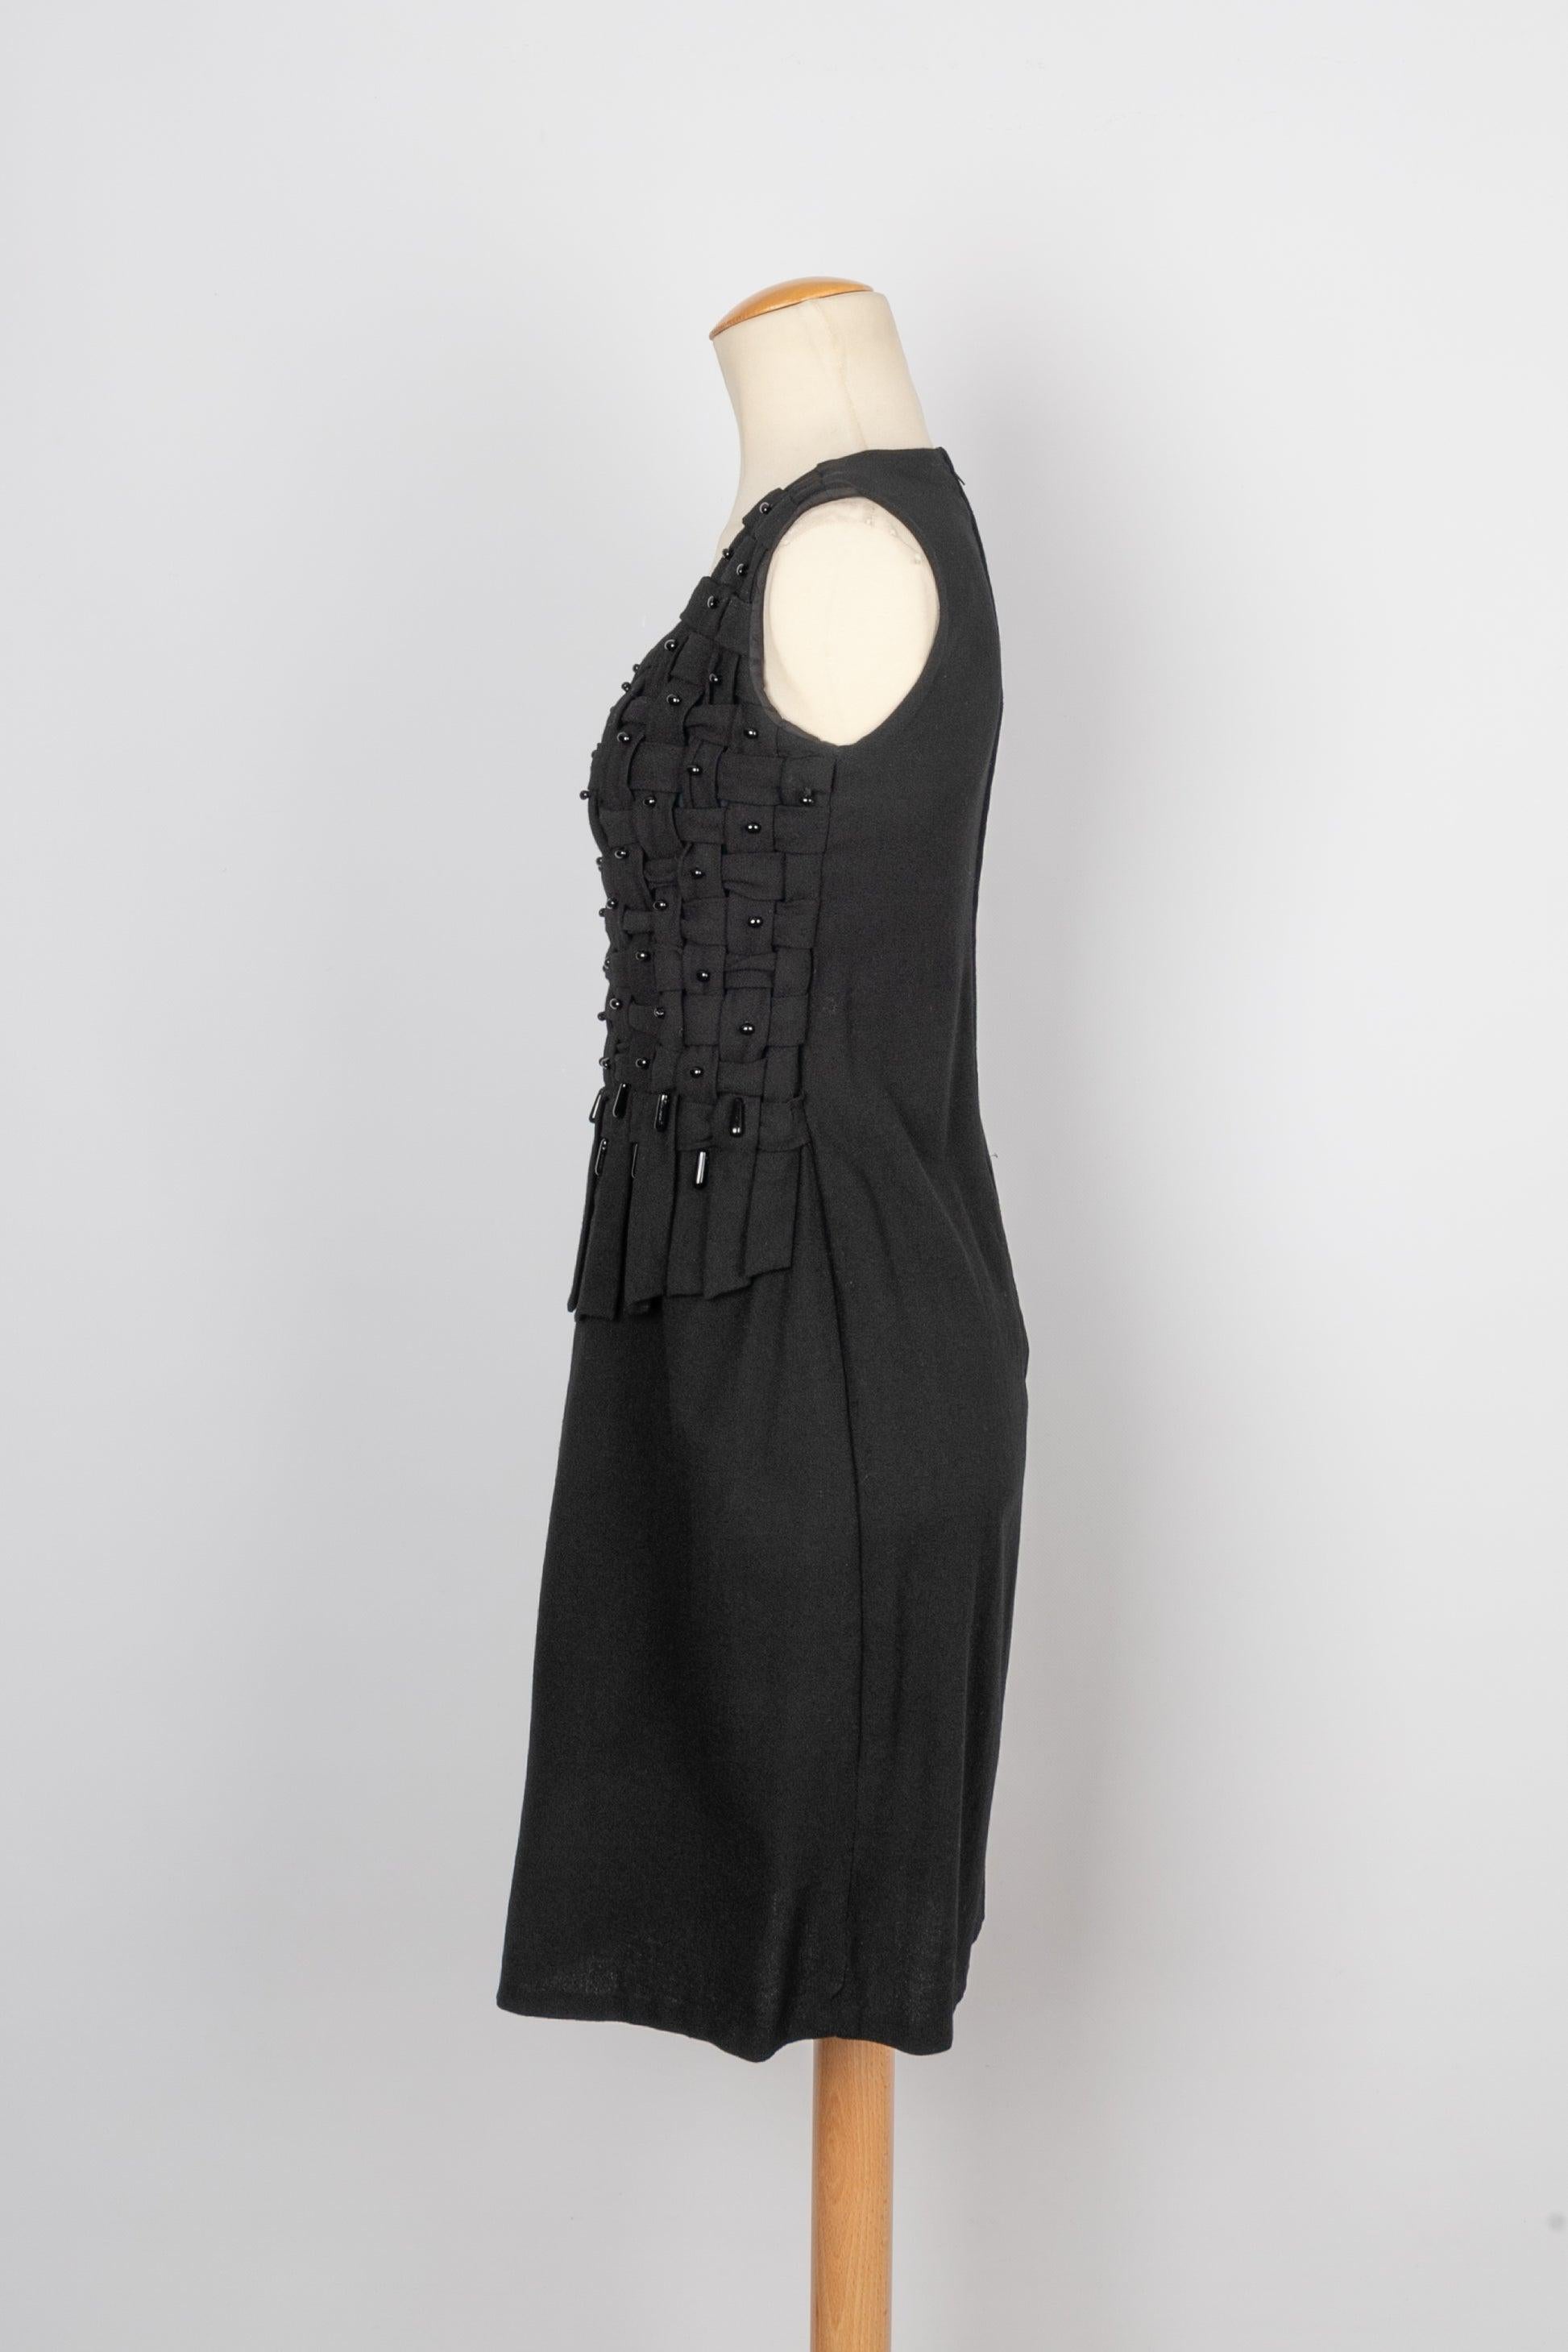 Women's Wool Cheesecloth Dress Sewn with Black Glass Pearls, 1950s/60s For Sale